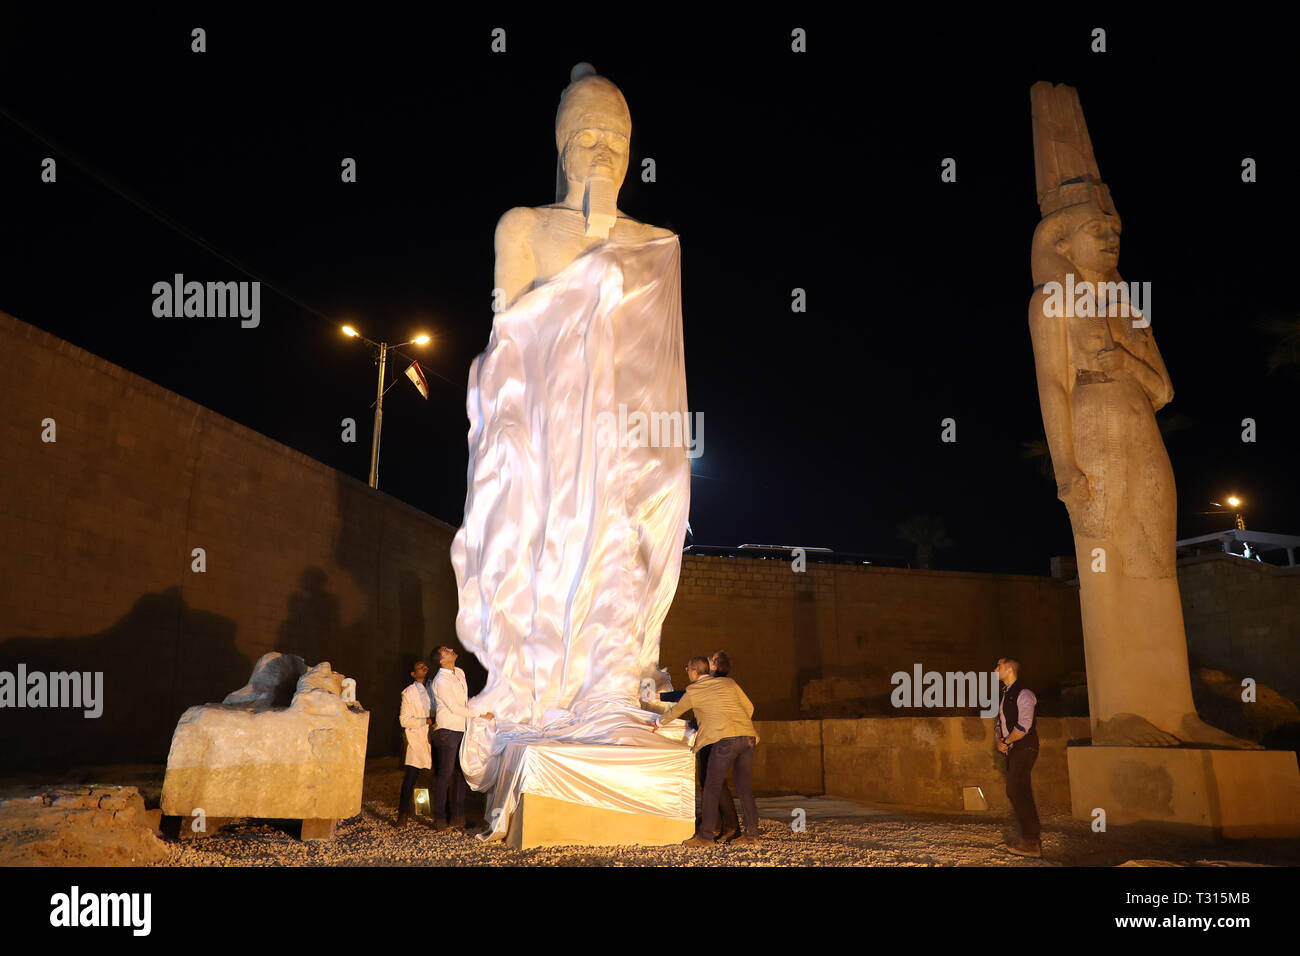 Sohag, Egypt. 5th Apr, 2019. People unveil a revived statue of Ramses II in Sohag, Egypt, April 5, 2019. Egyptian archeologists have pieced on Friday 70 fragments to revive a large statue of Ramses II in the upper Egypt's province of Sohag. Ramses II was the third pharaoh of the Nineteenth Dynasty of Egypt and was considered the strongest pharaoh of the New Kingdom that spans from the 16th century BC to the 11th century BC. Credit: Ahmed Gomaa/Xinhua/Alamy Live News Stock Photo